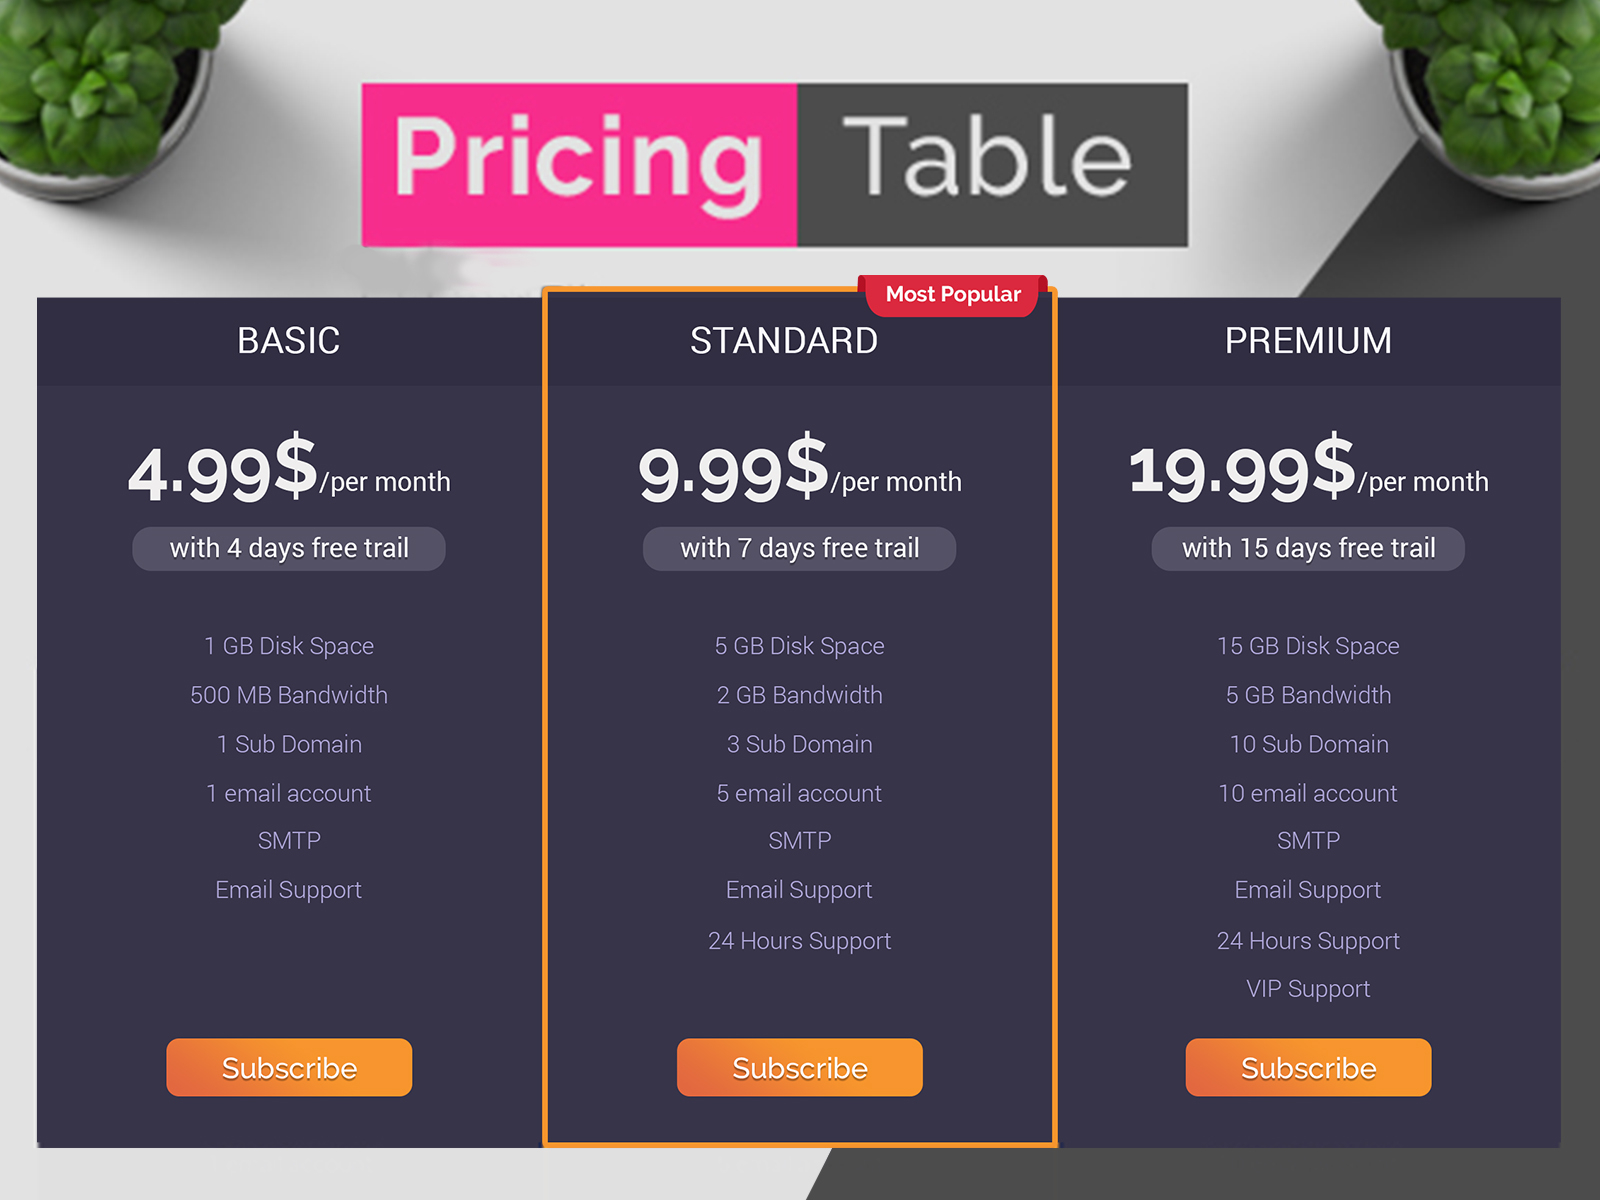 Pricing Table Pricing Chart Pricing Package Download.